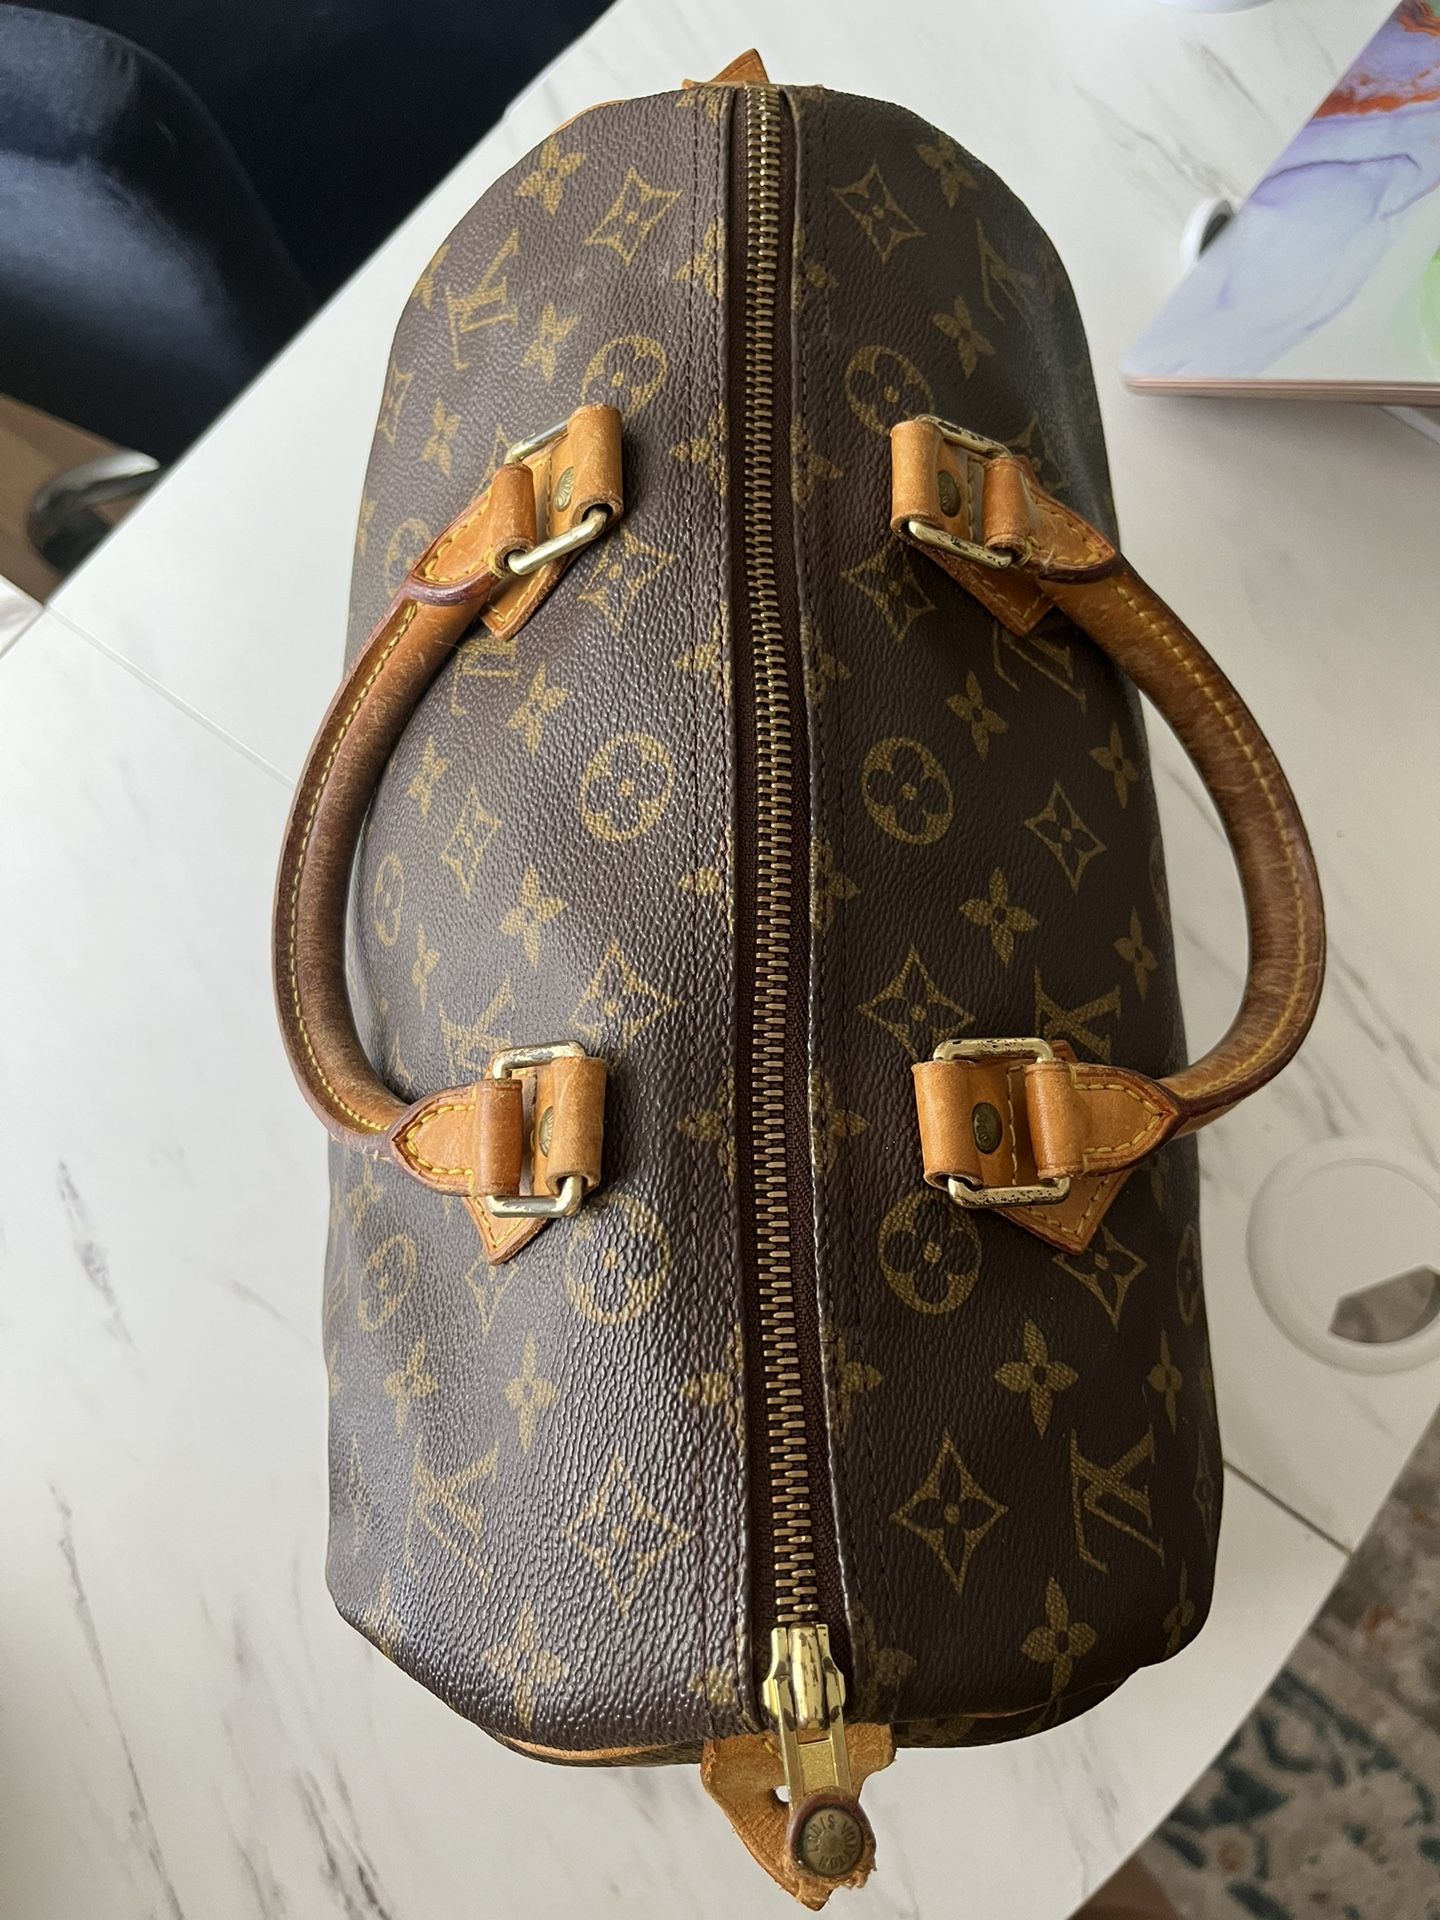 LV Speedy 30 Authentic for Sale in Naperville, IL - OfferUp